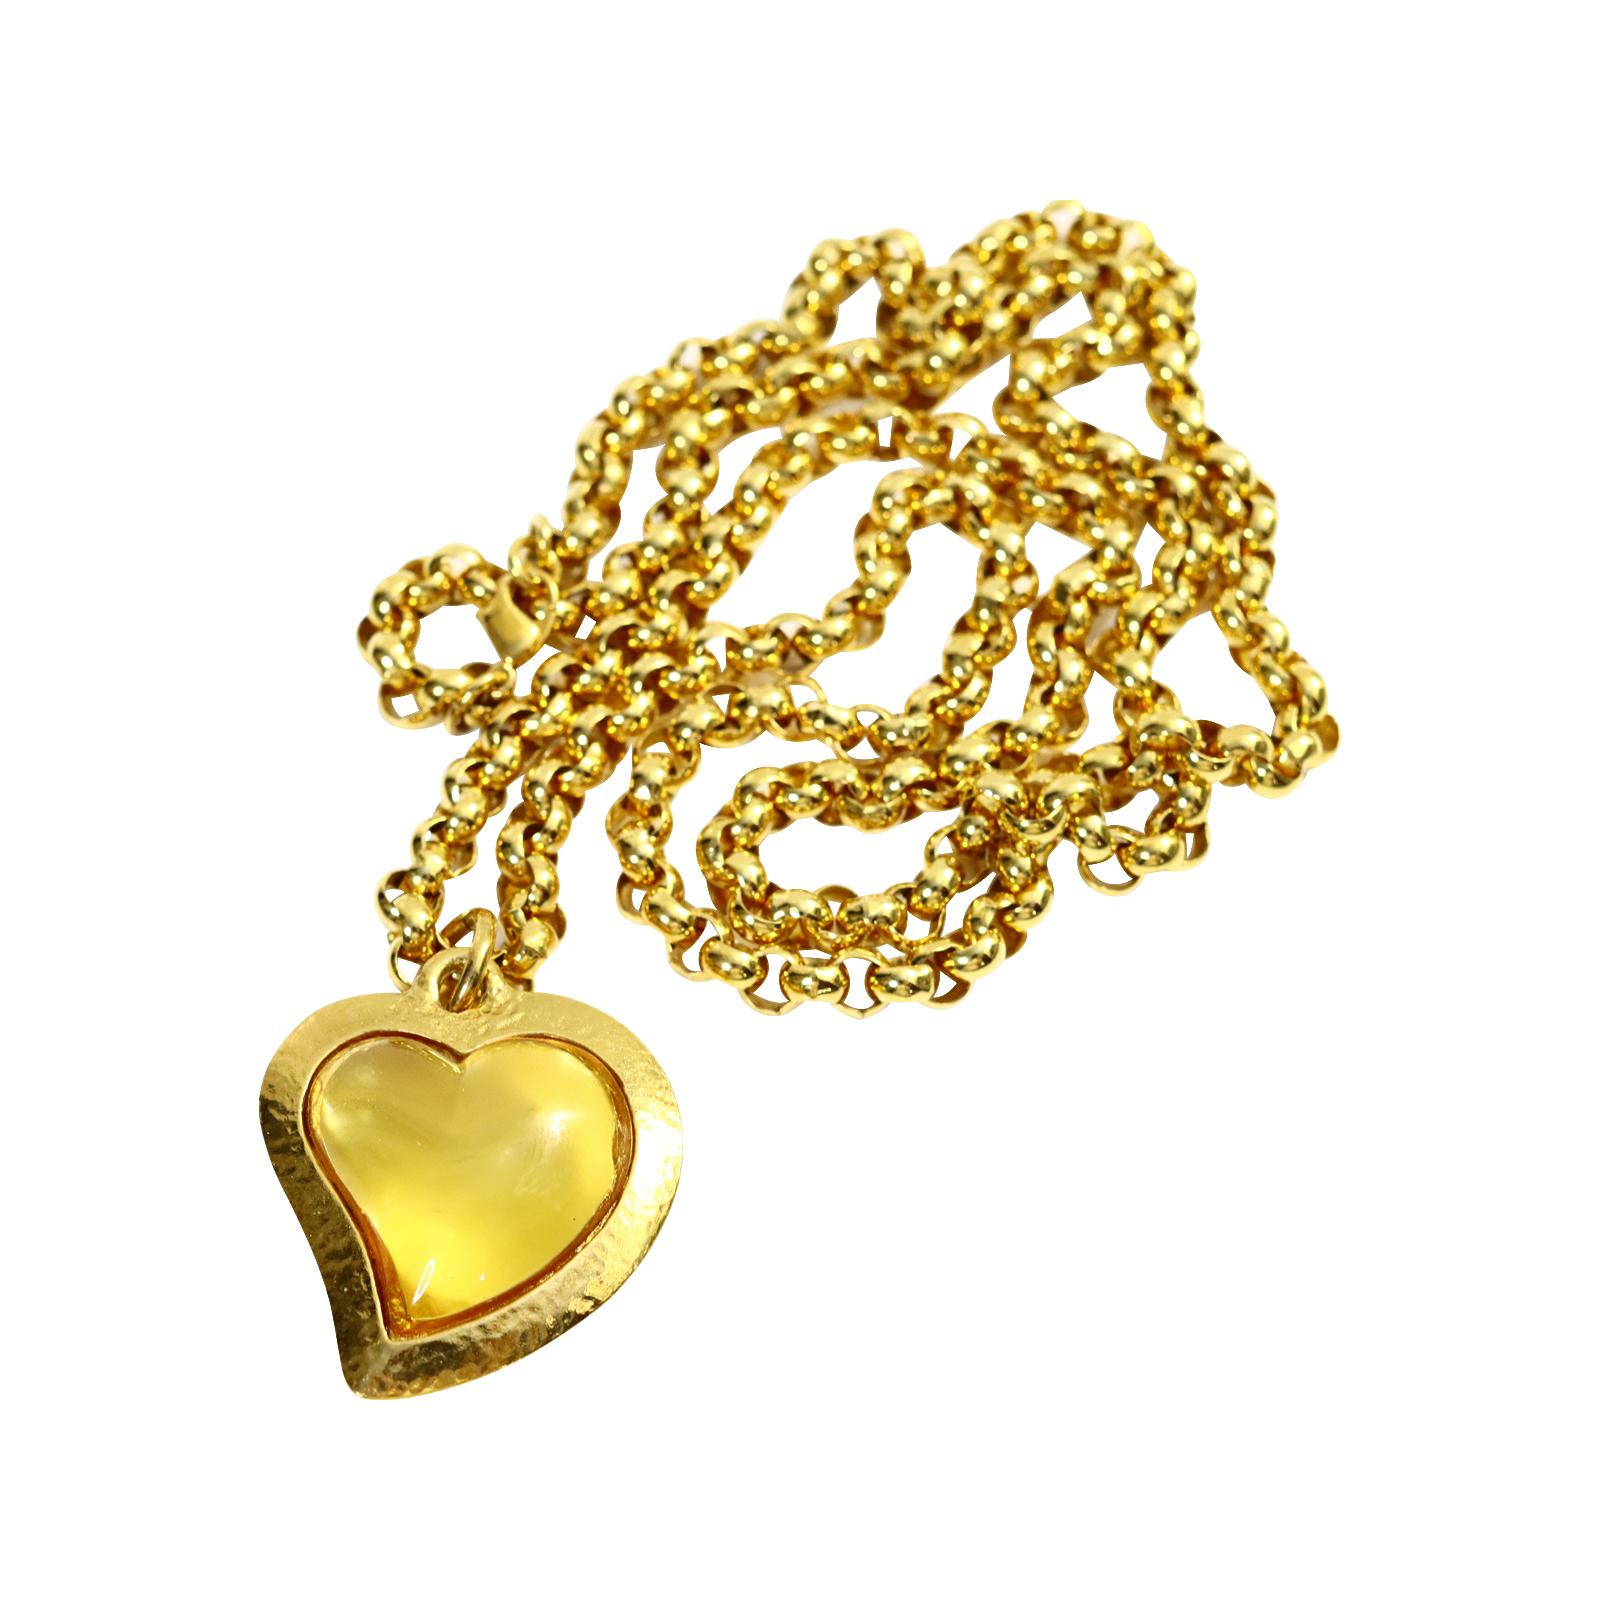 Vintage Yves Saint Laurent YSL Amber Resin Heart on Rollo Long Chain Circa 1980s For Sale 2